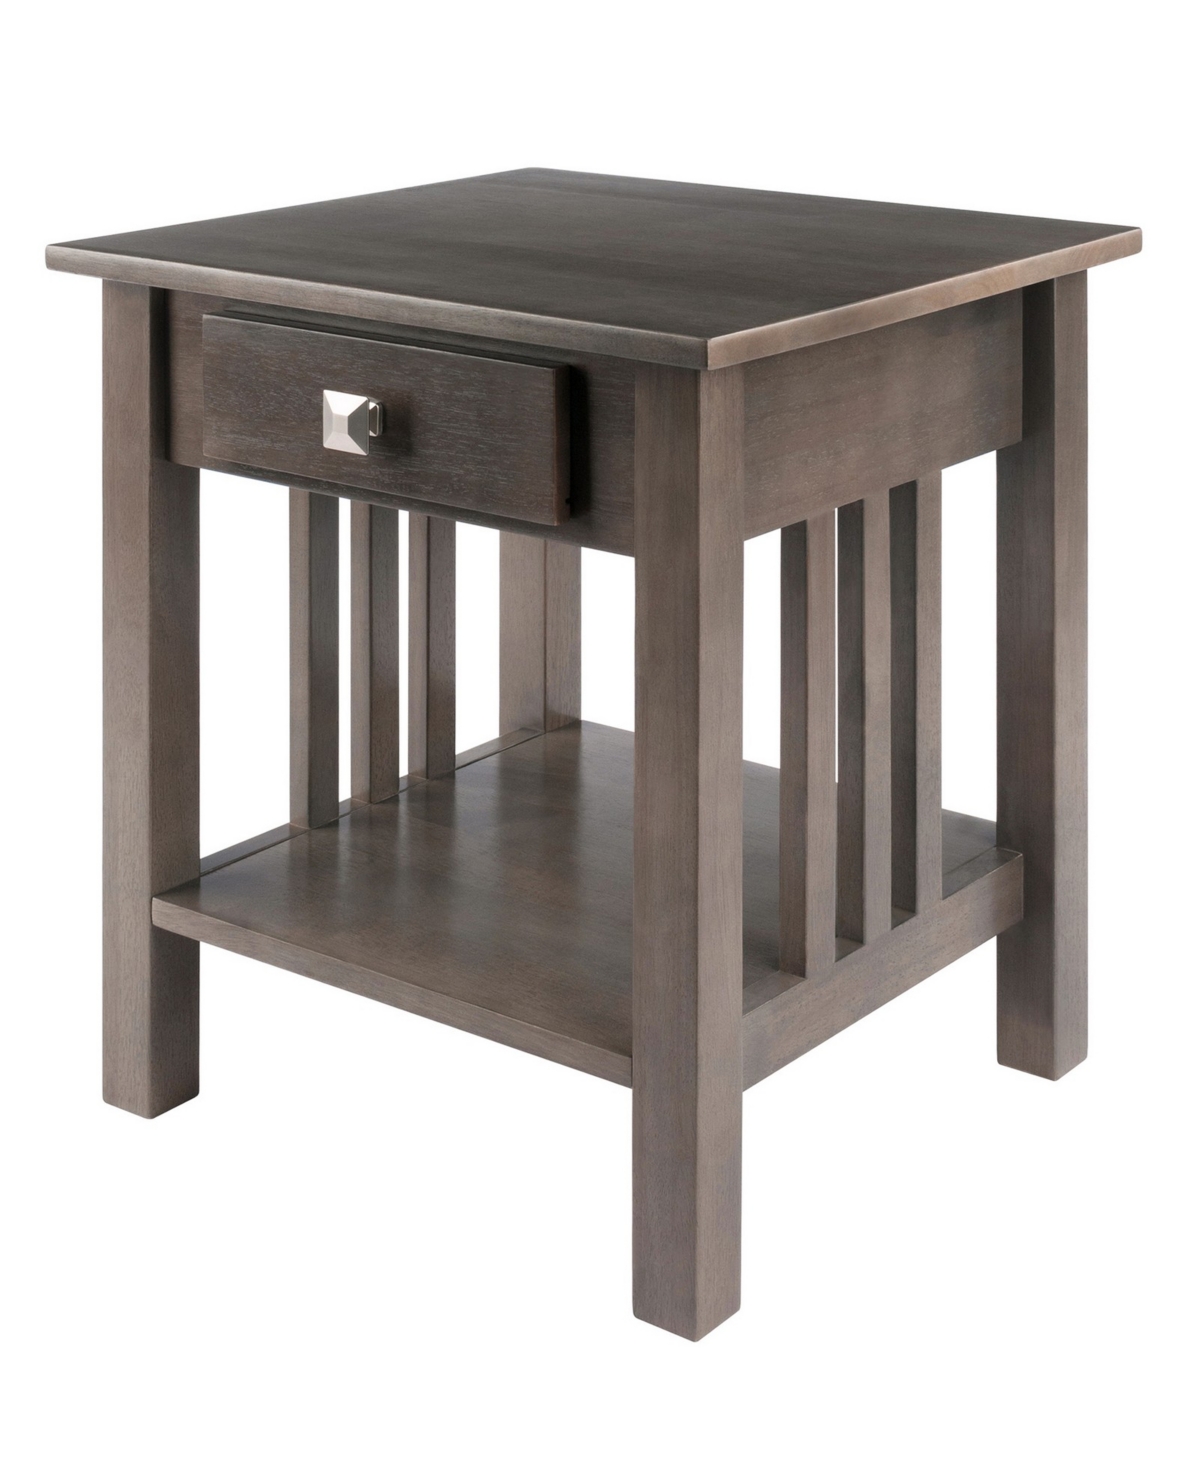 Winsome Stafford 22.05" Wood Accent Table In Oyster Gray